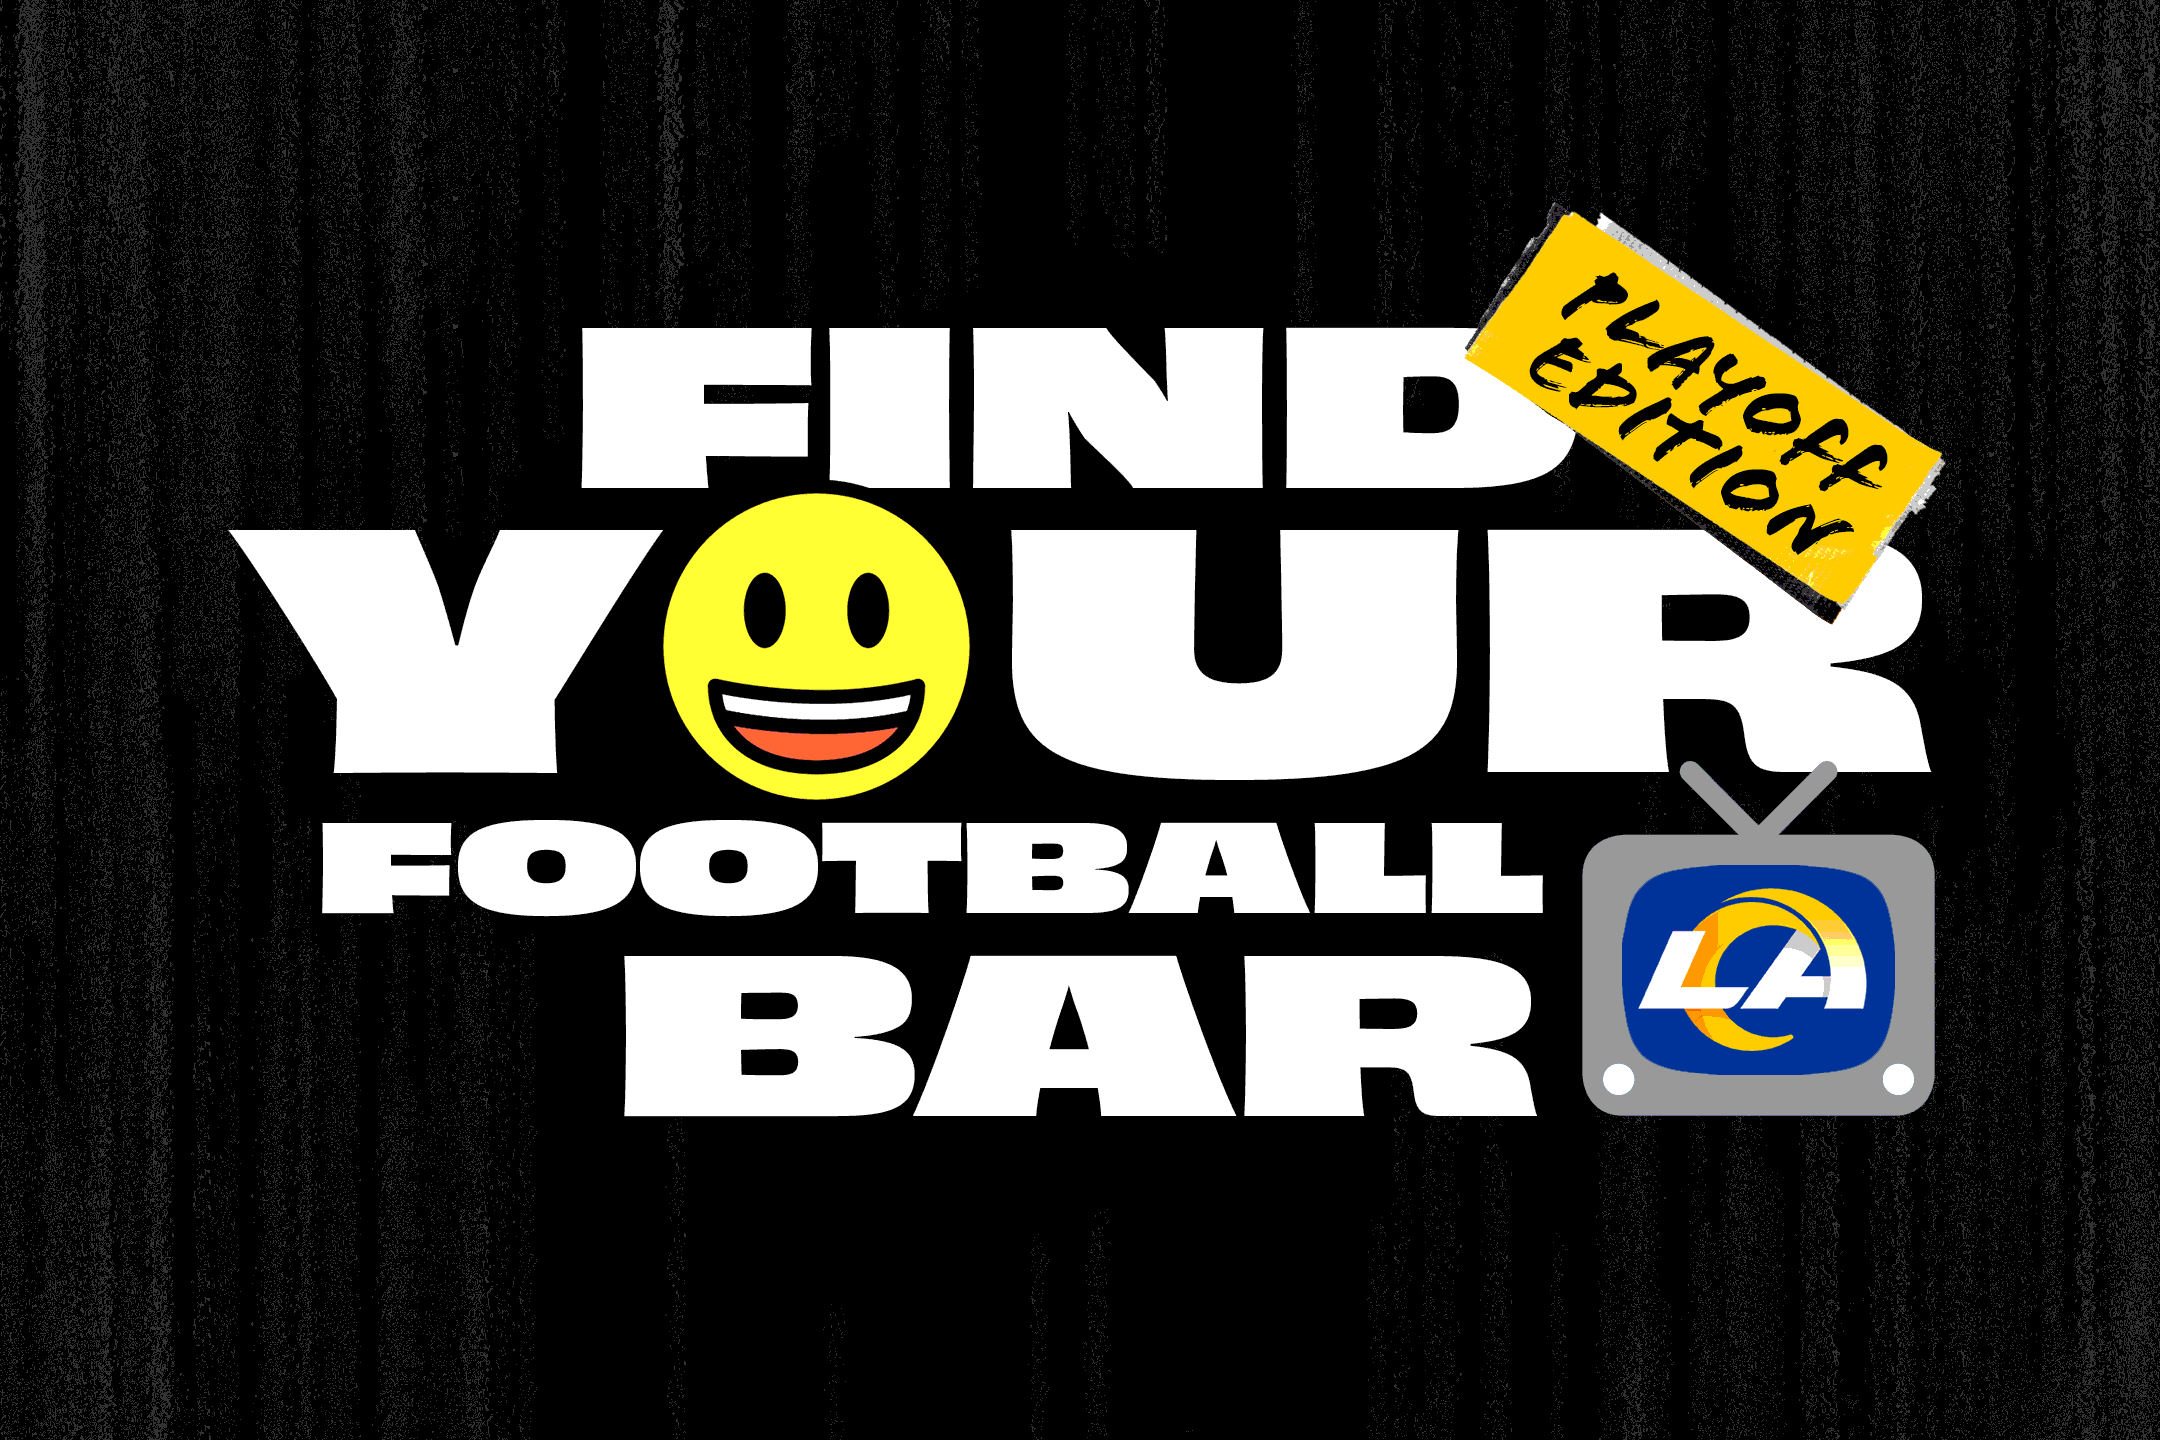 Find your NFL playoff bar.